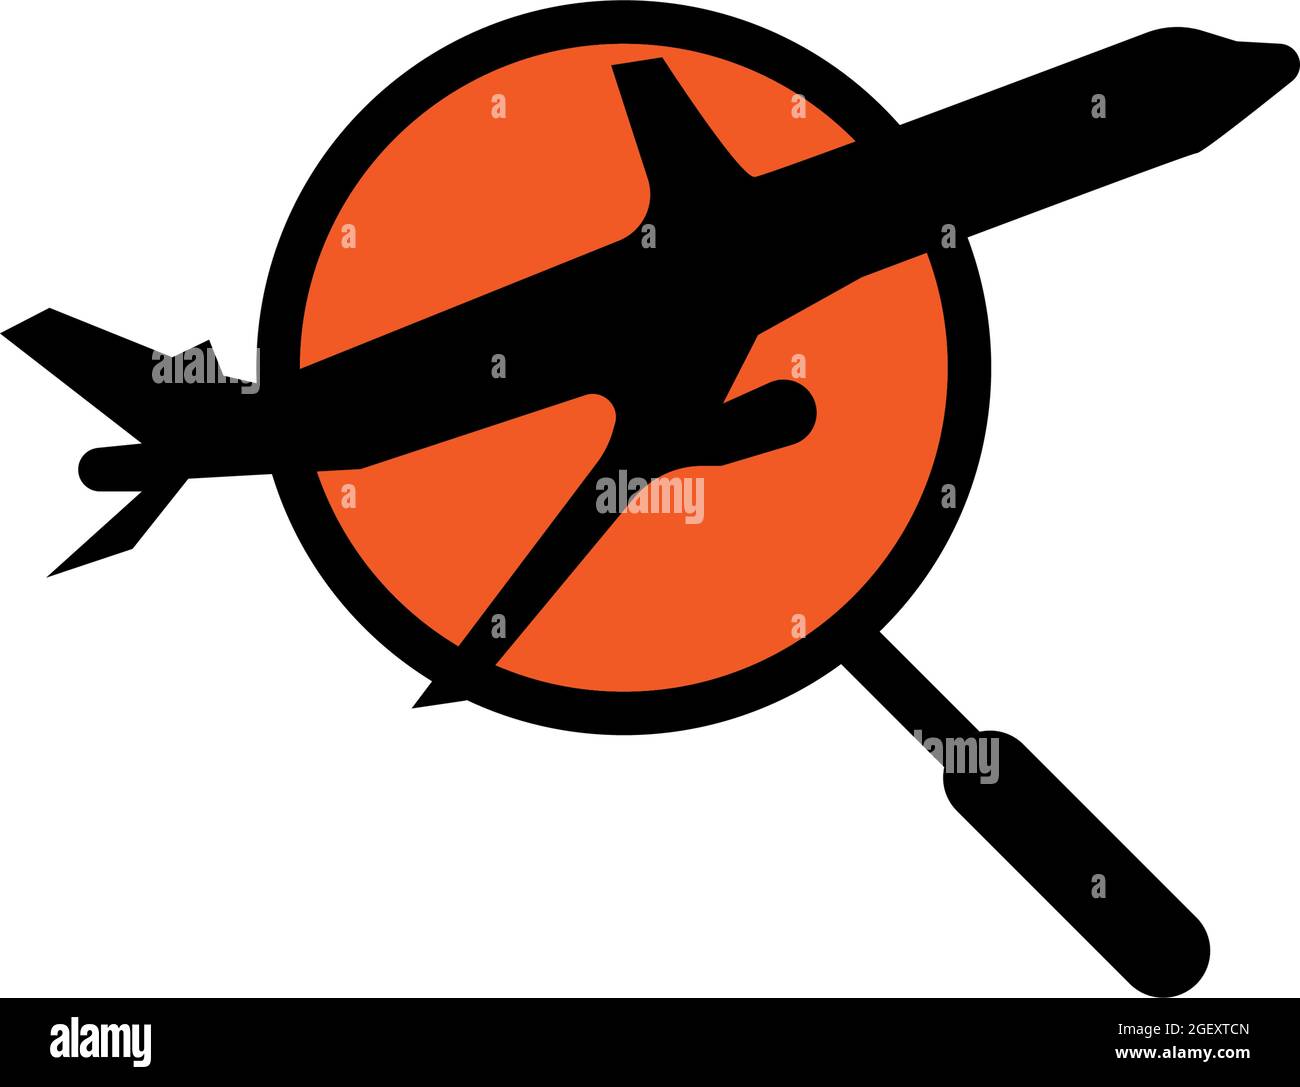 Vector illustration of an airplane and a magnifying glass, great for travel icons and logos, travel companies Stock Vector